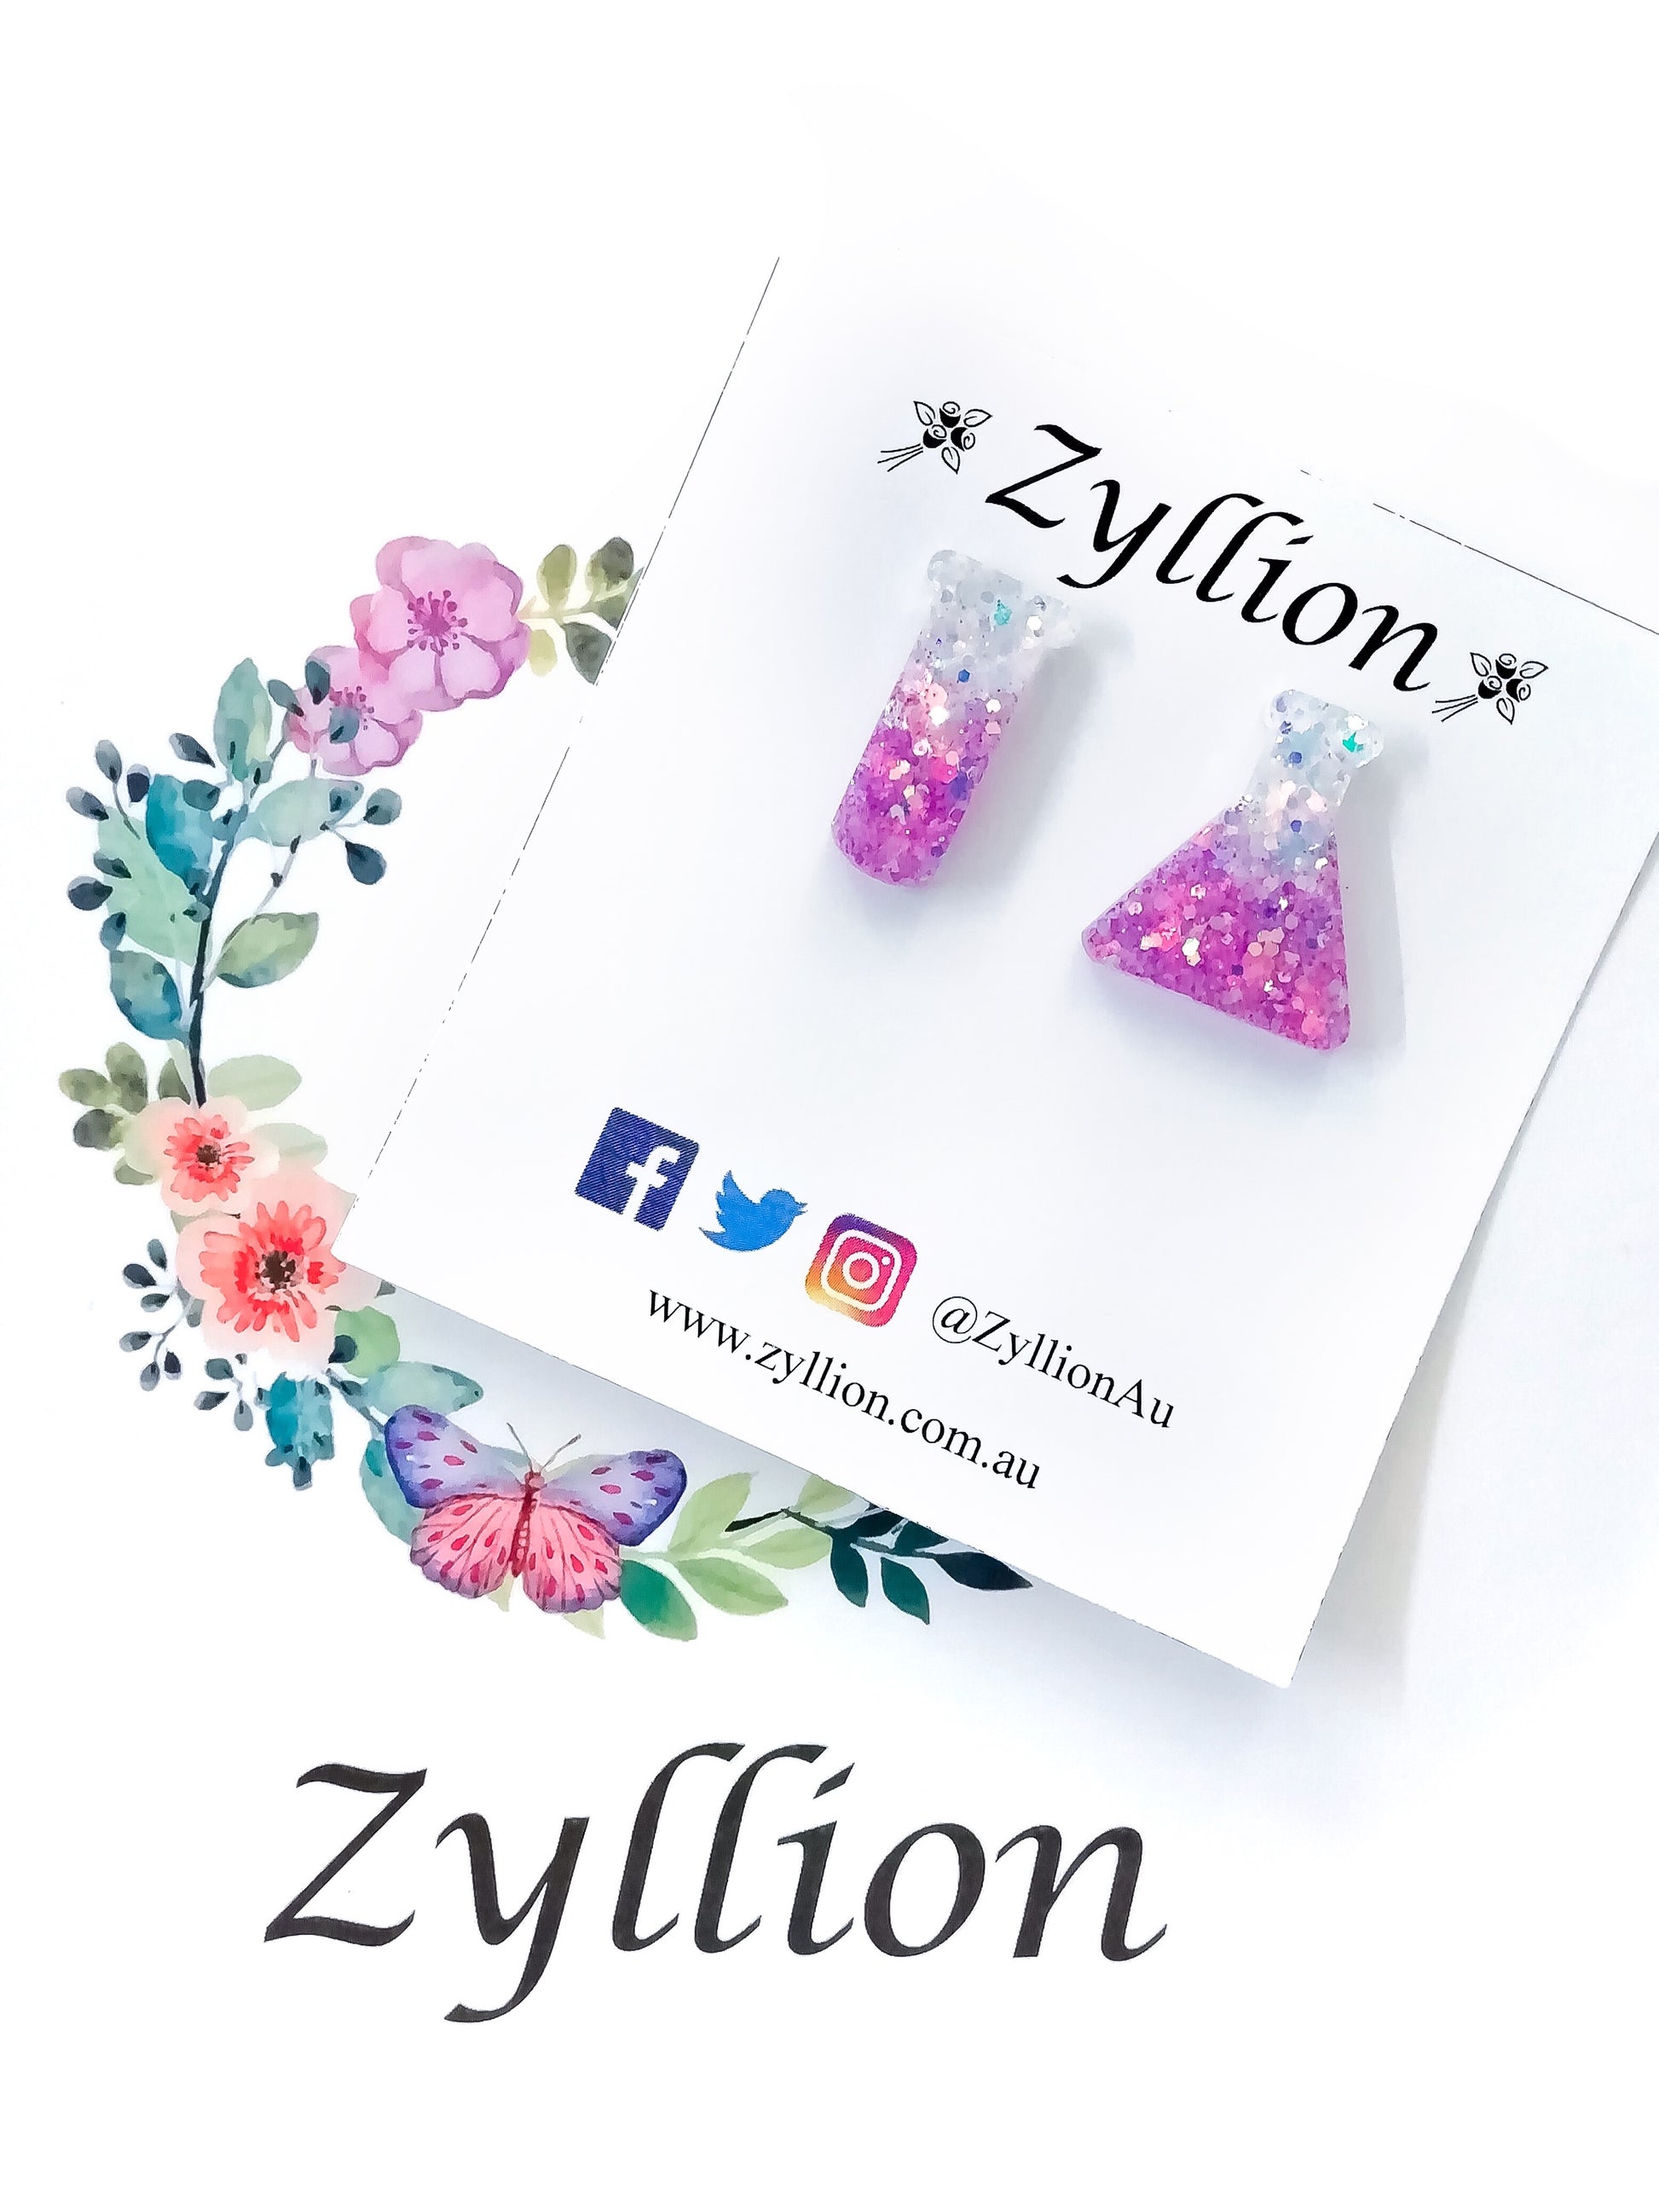 Mini Test Tube & Conical Flask Studs Sterling Silver Earrings - Zyllion